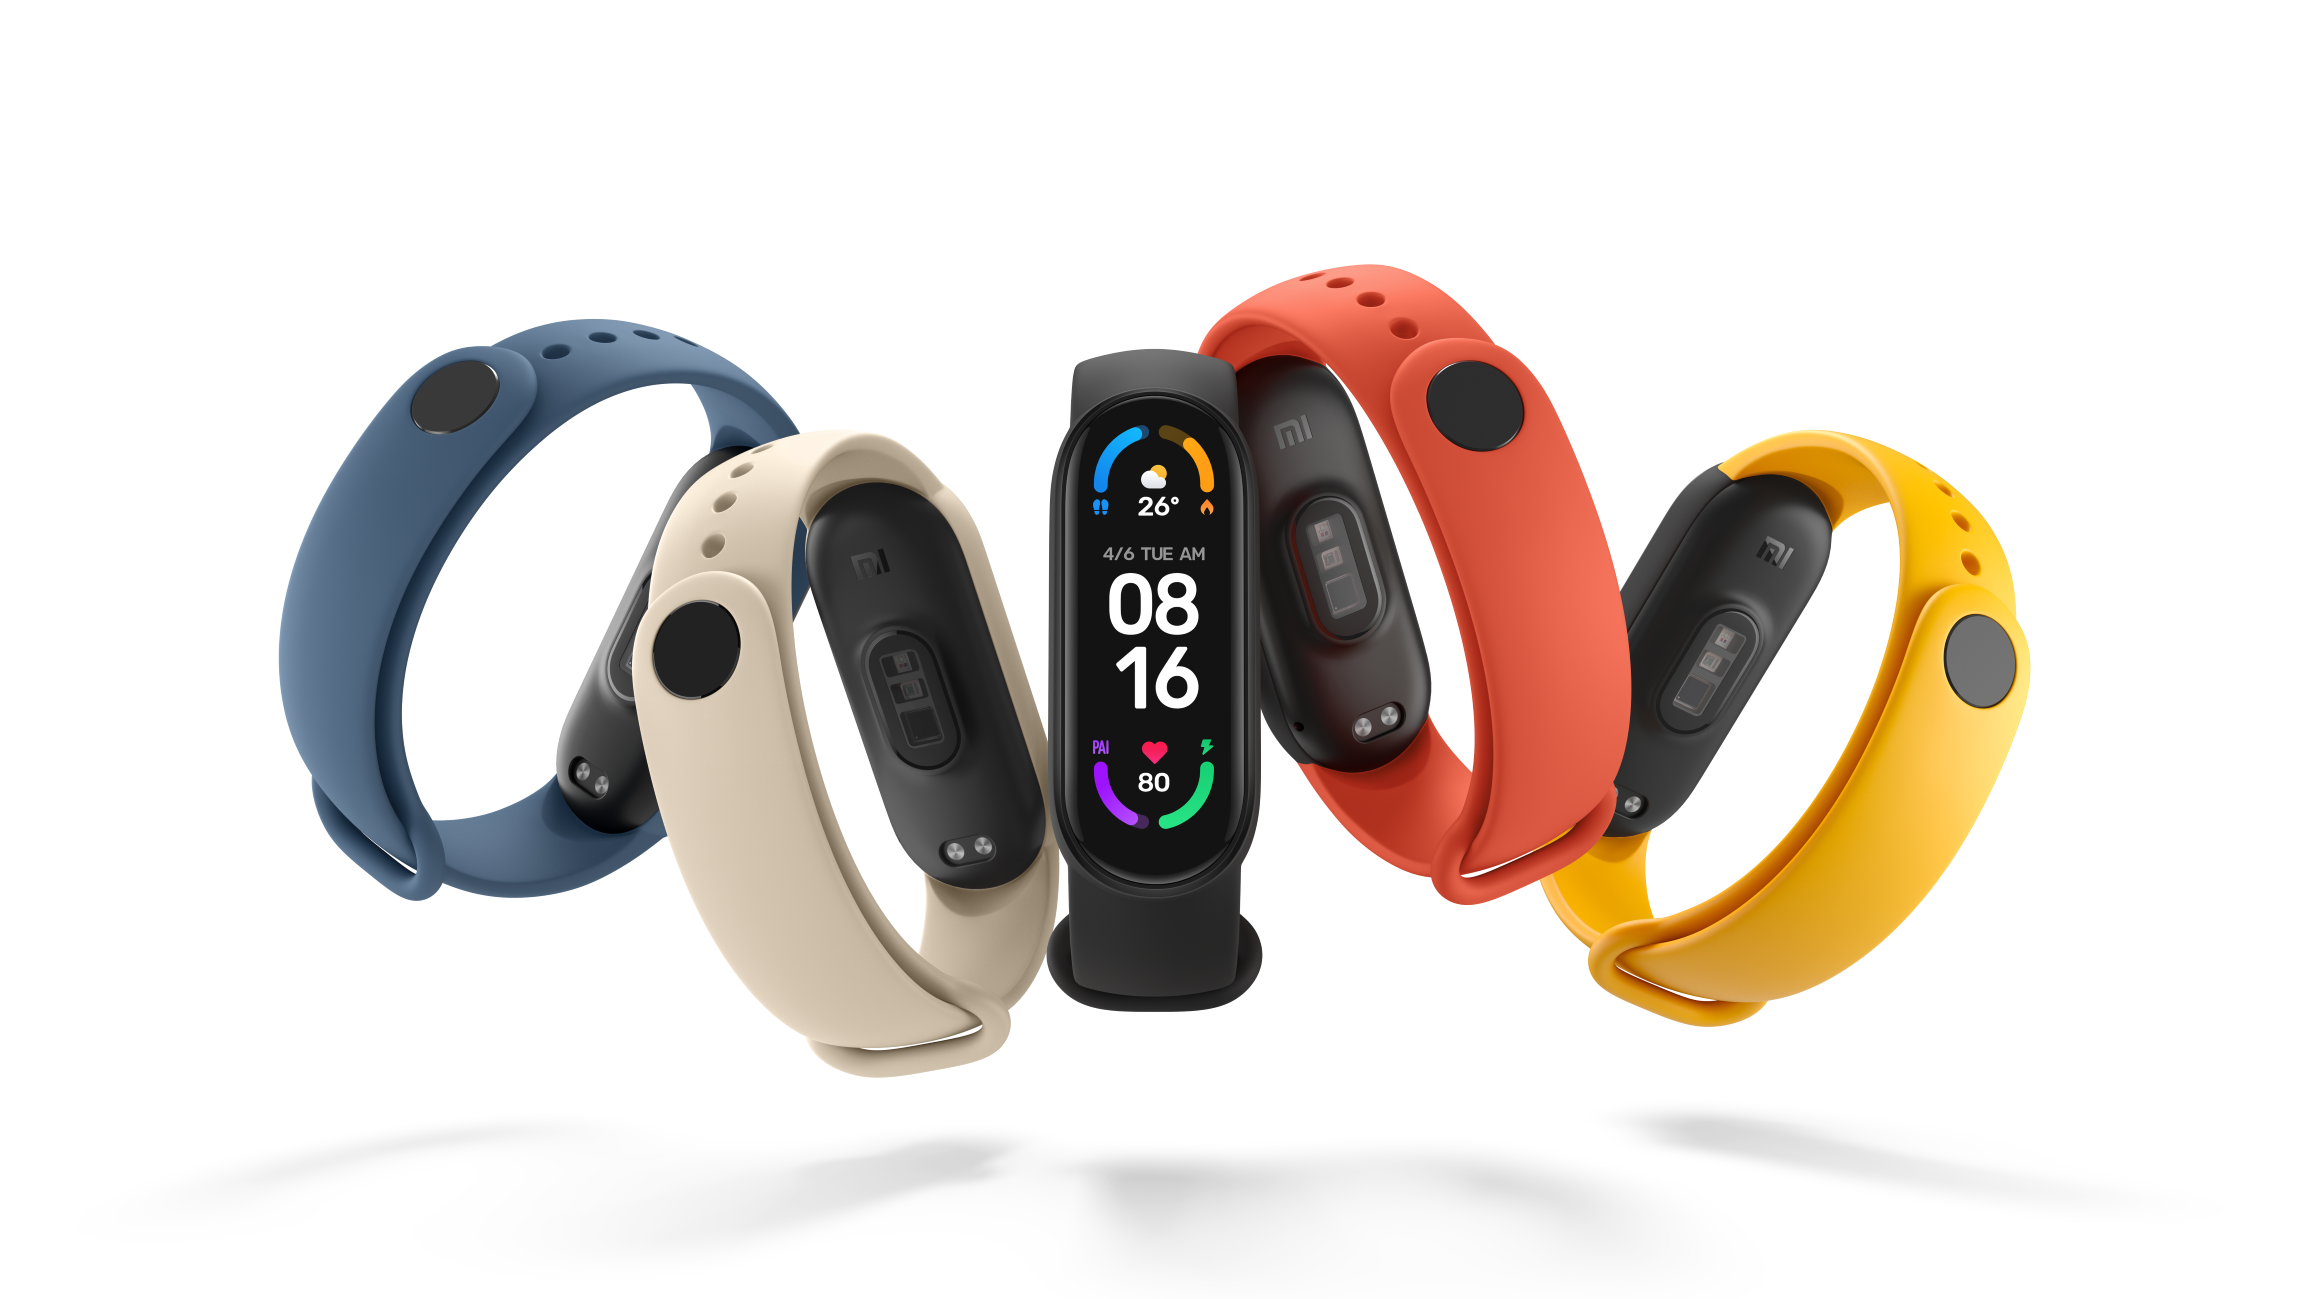 Xiaomi Mi Band 6: Release Date, Pricing and New Features - Tech Advisor